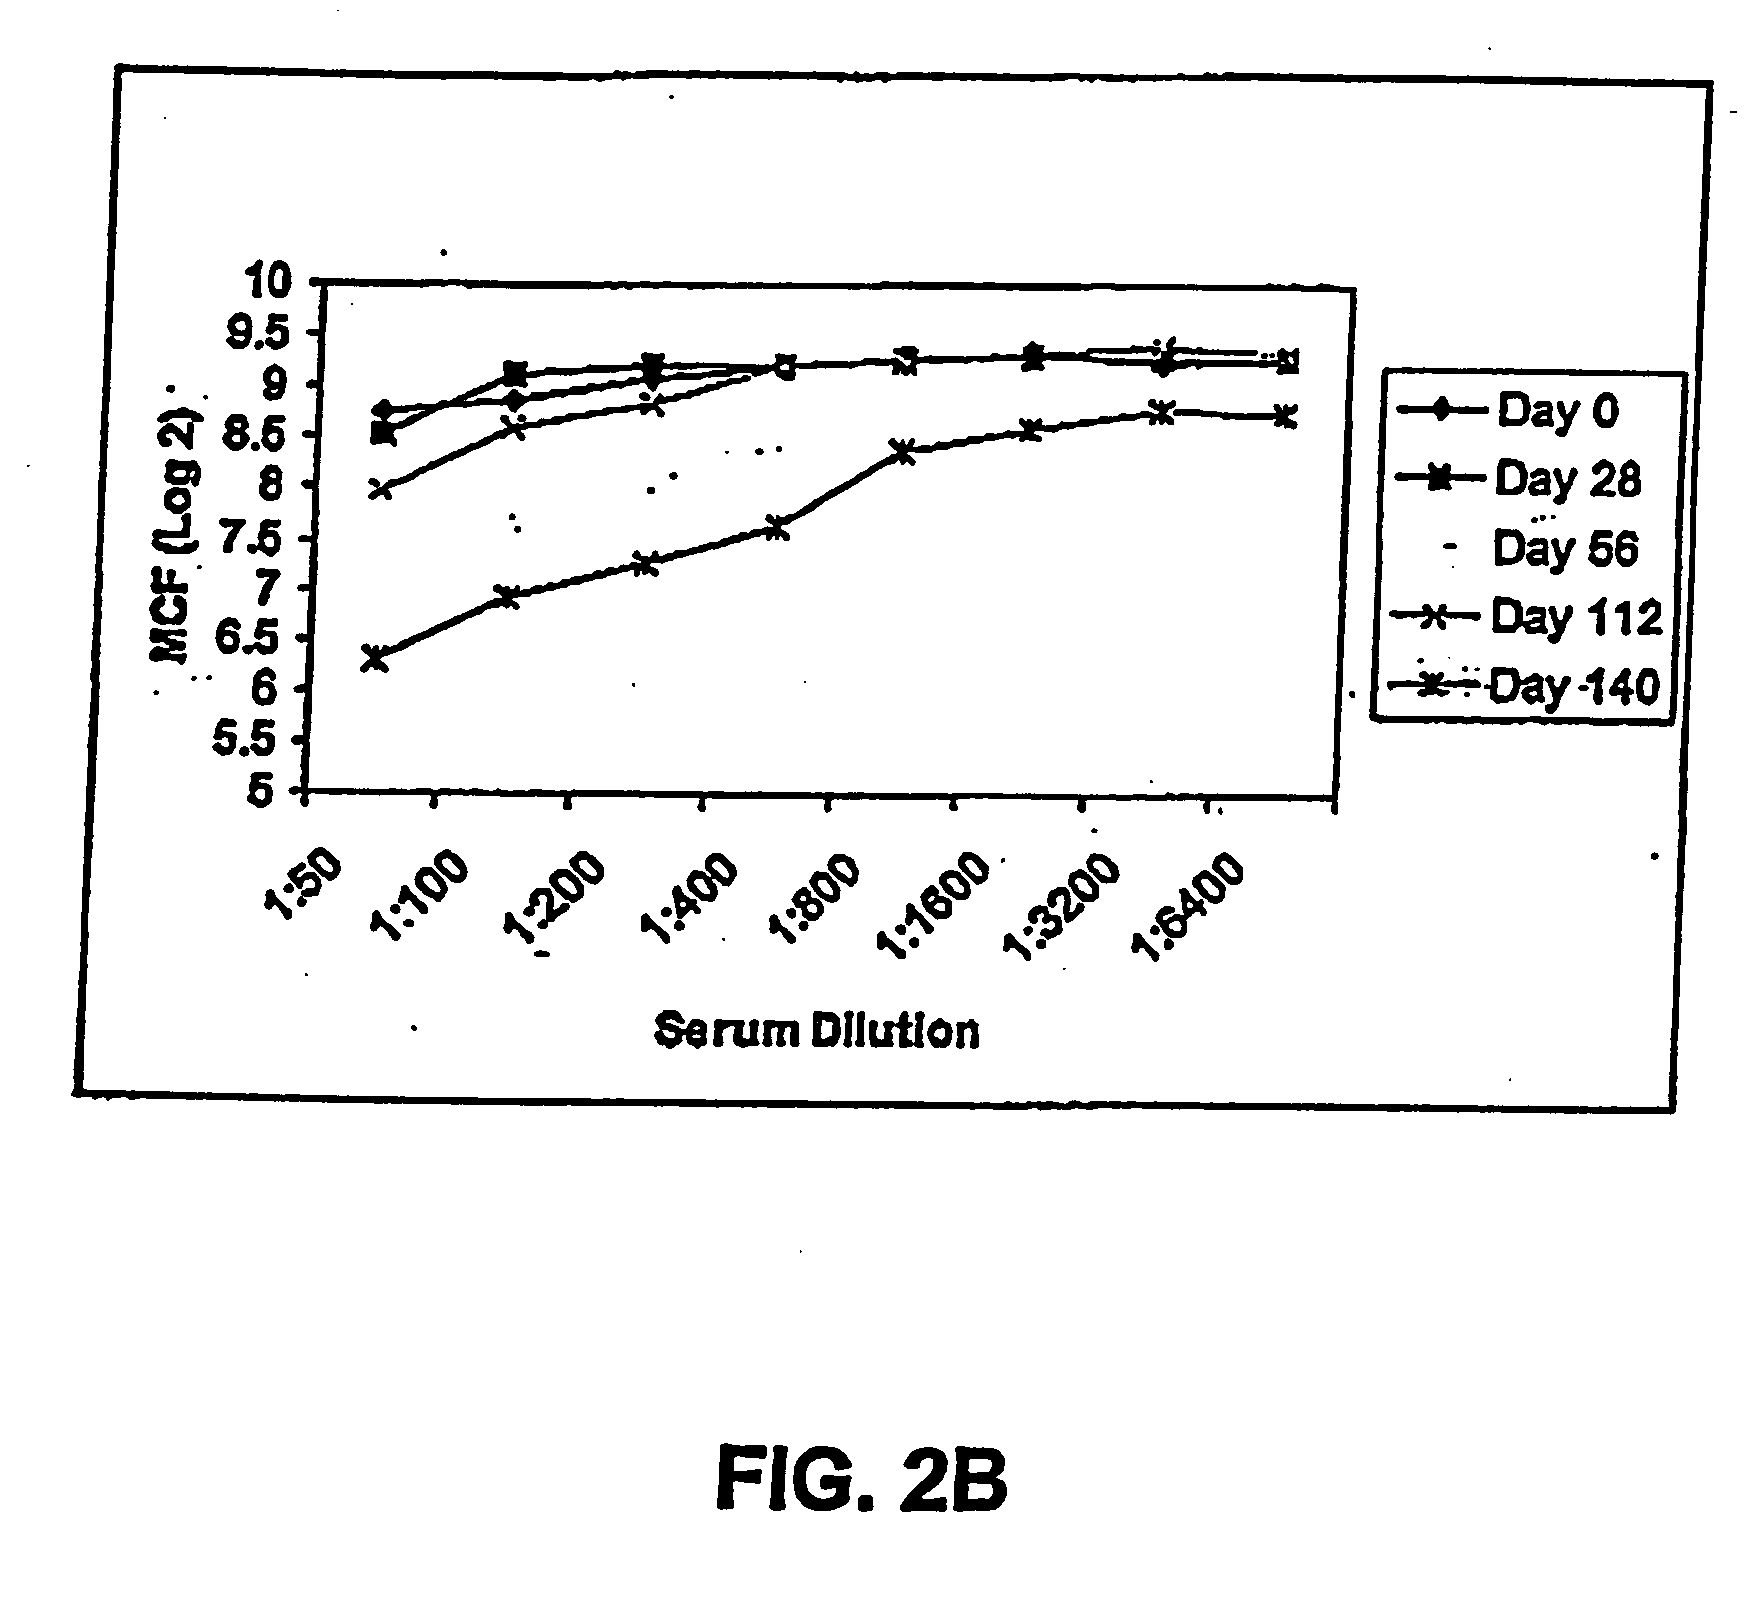 Method of administering FimH protein as a vaccine for urinary tract infections